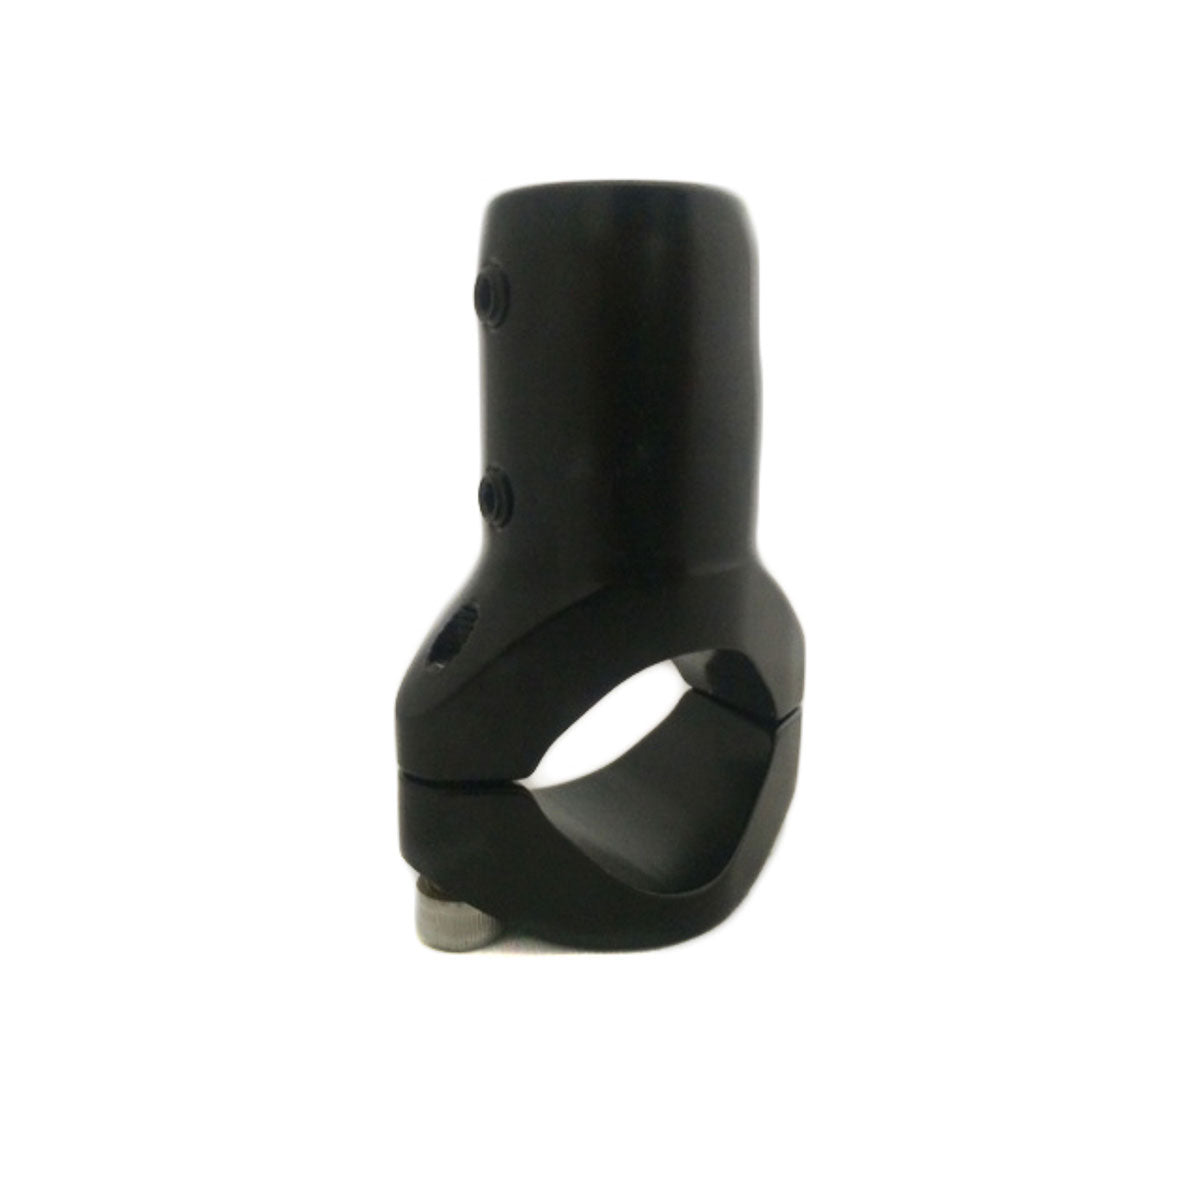 Kartech Exhaust Support Spigot - X3-X6. Also requires KES6 or KES6C